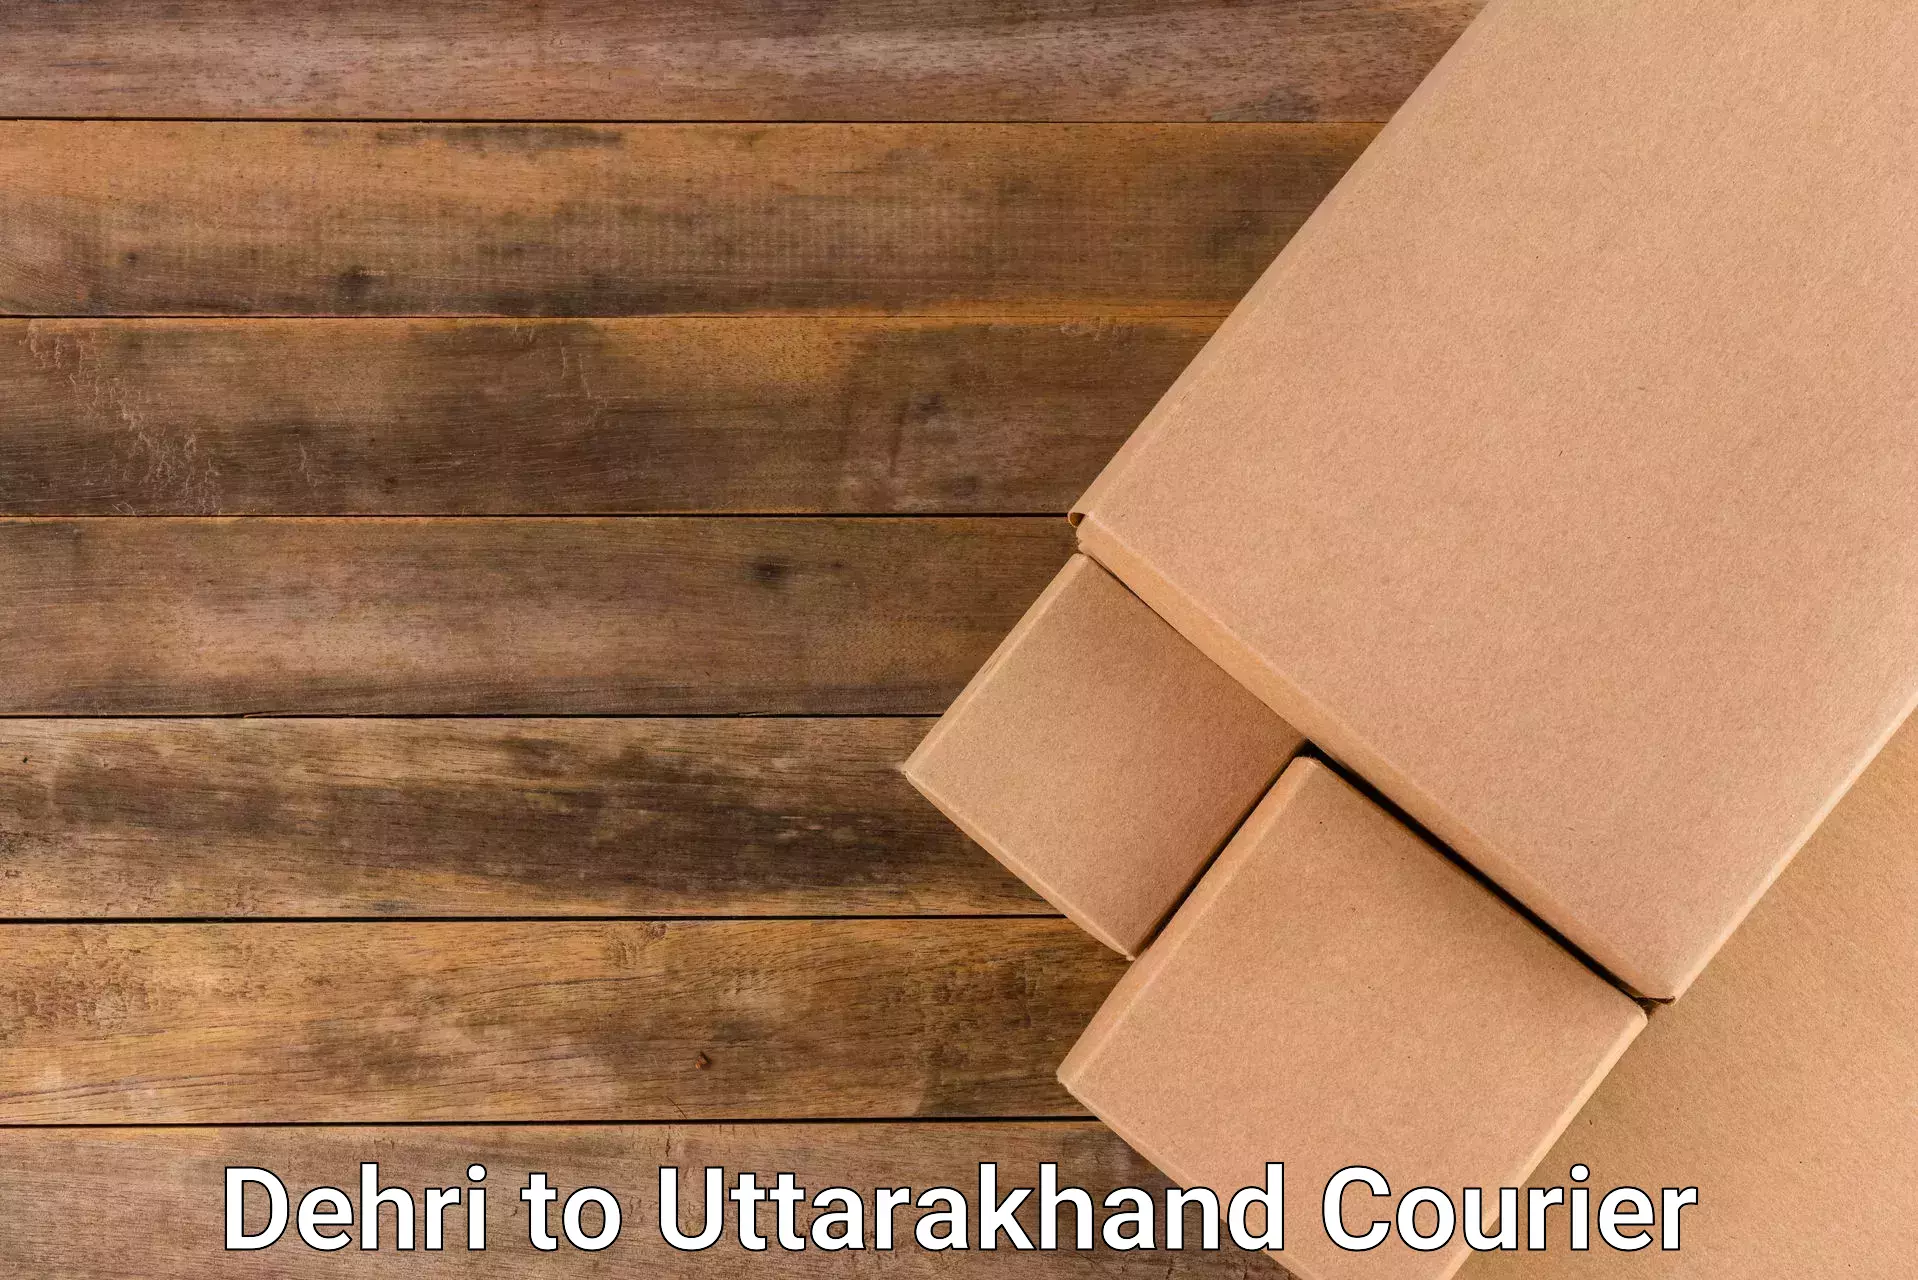 Overnight delivery services Dehri to Uttarakhand